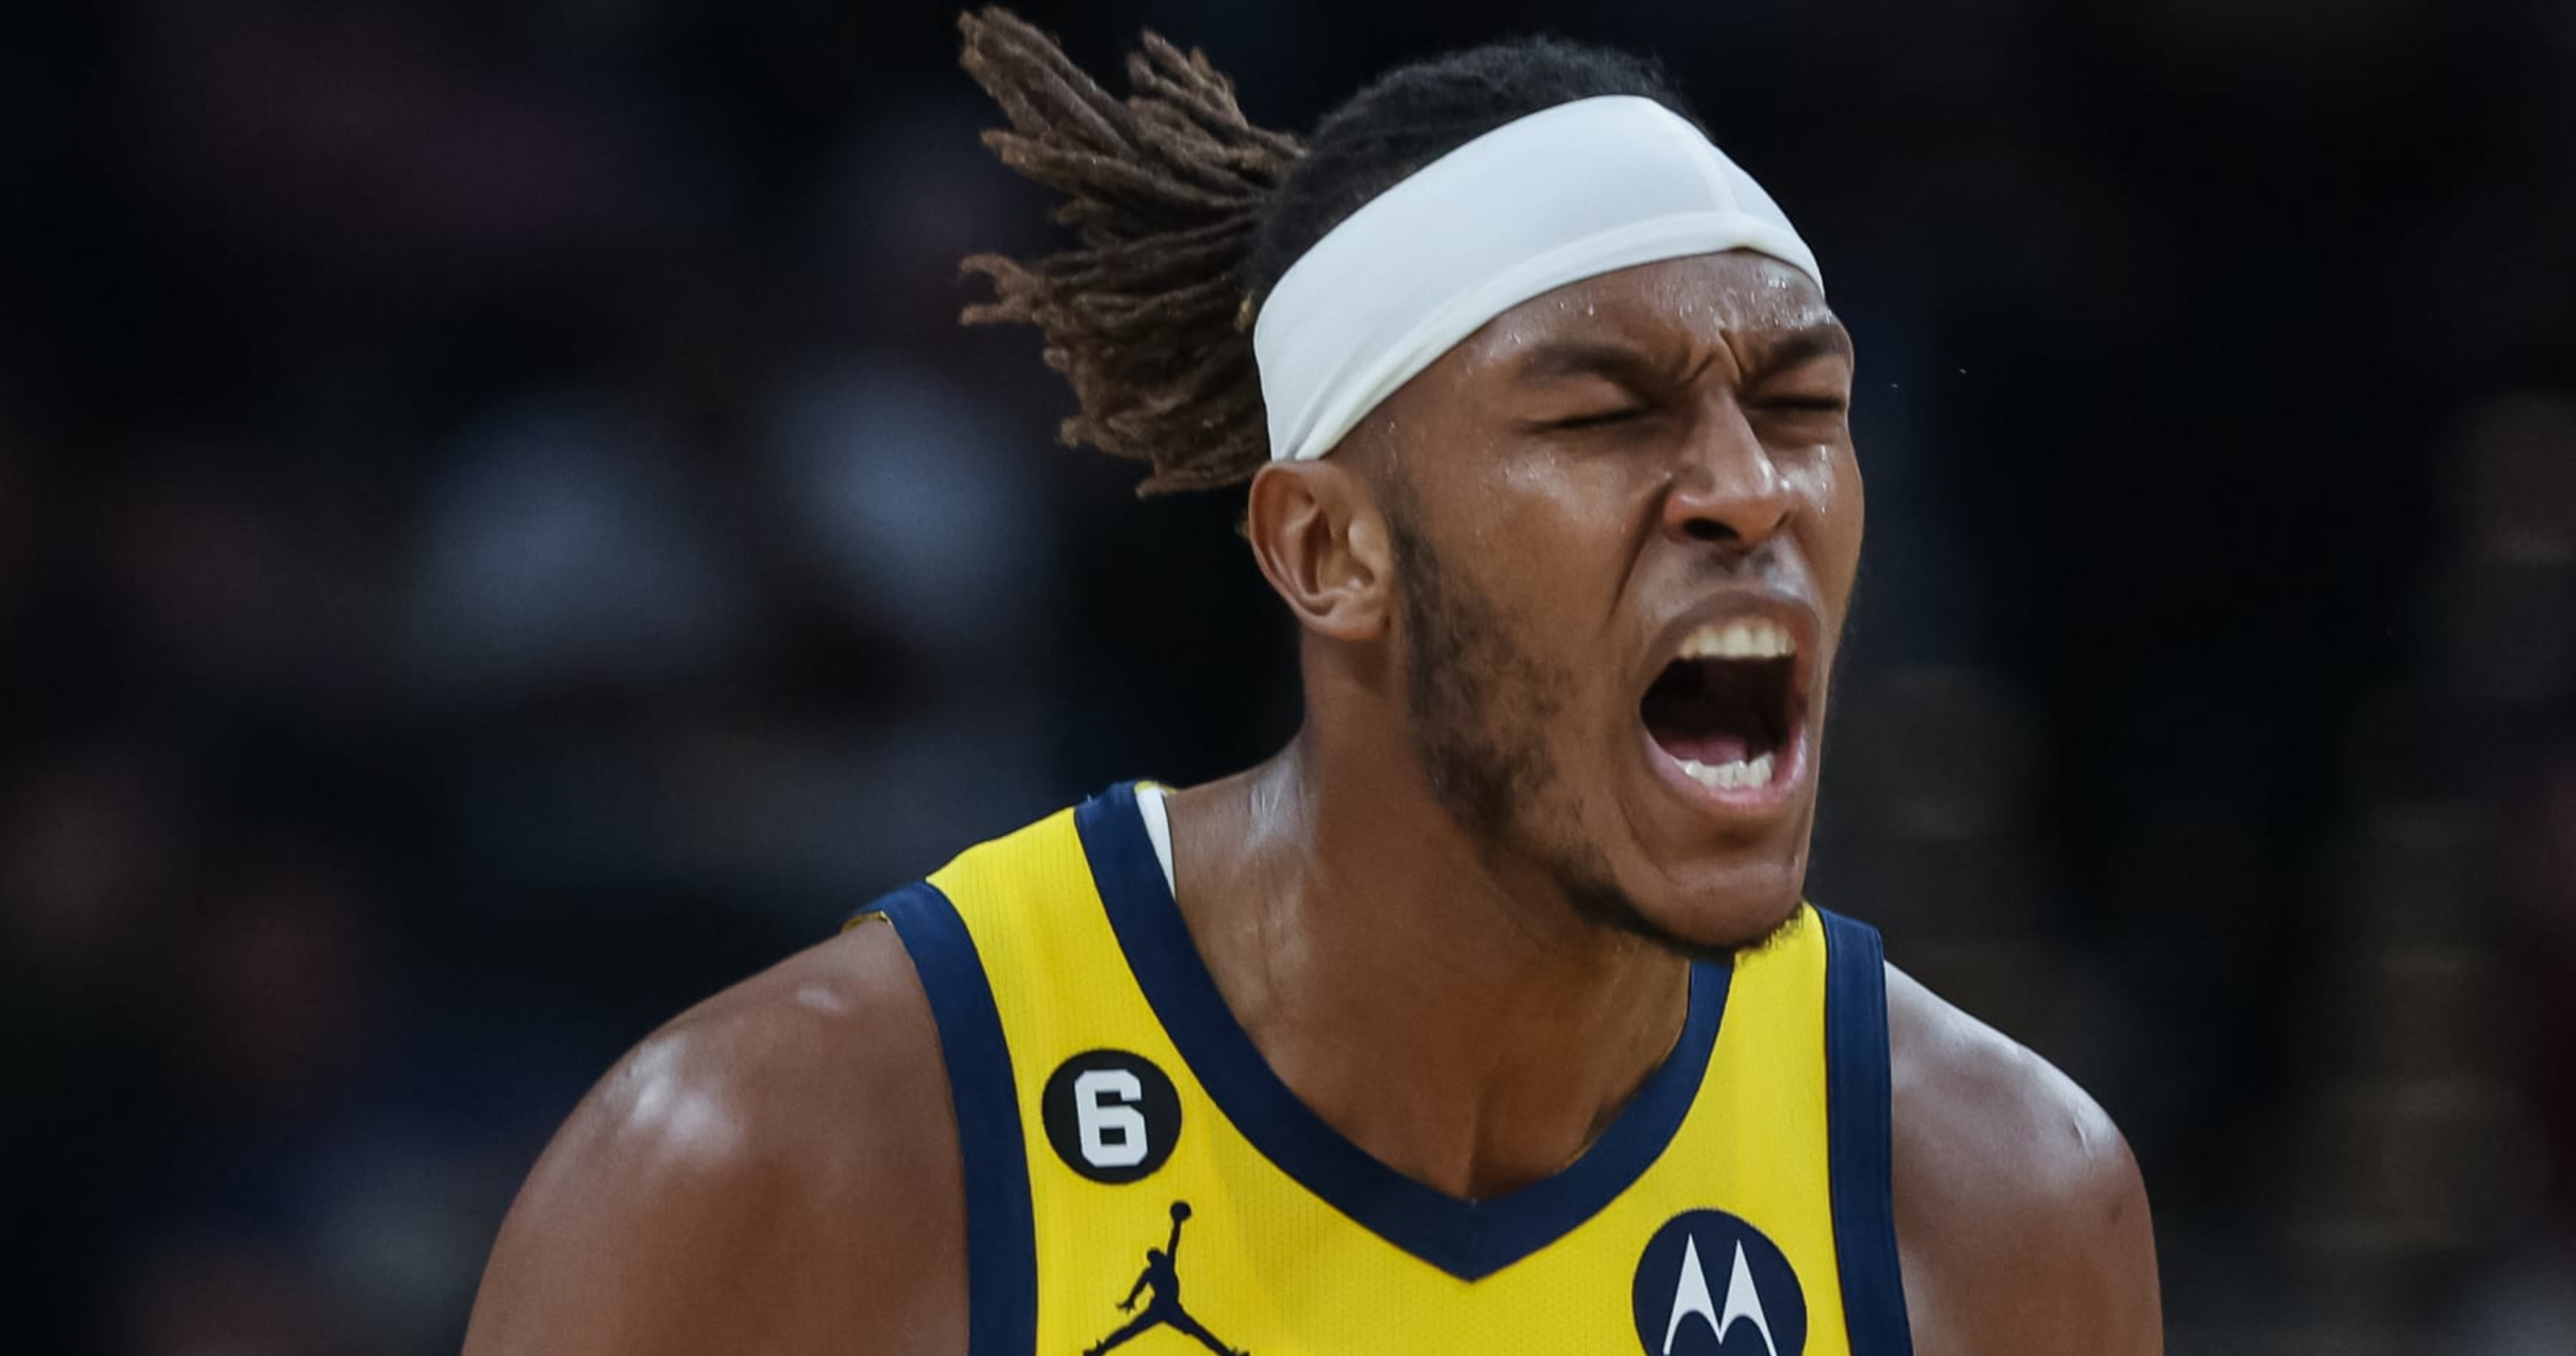 Sources: Lakers Not Only L.A. Team Mulling Myles Turner Trade